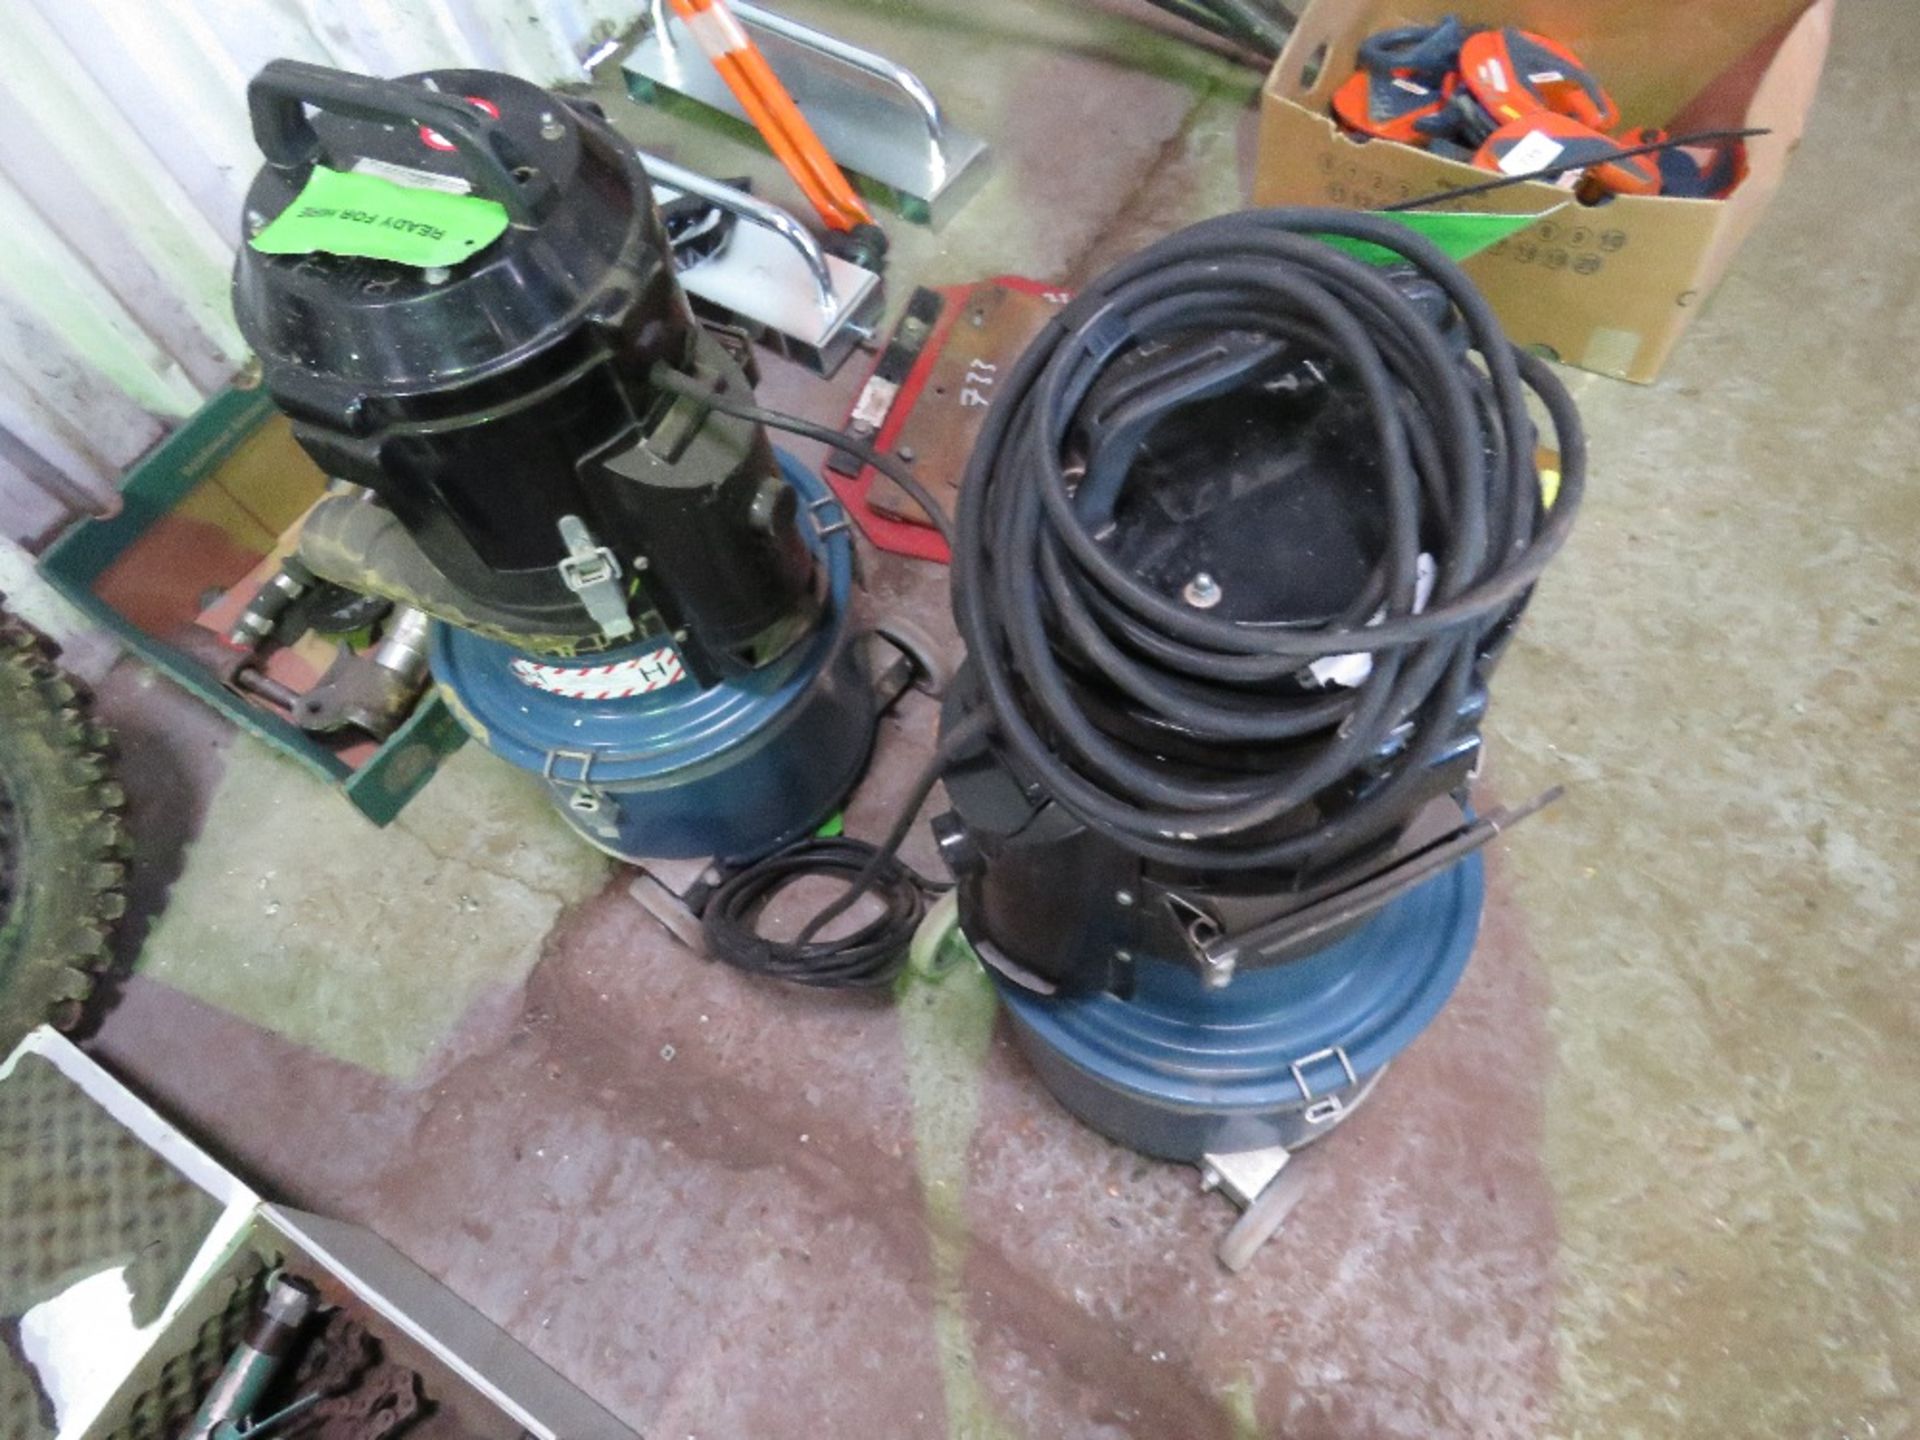 2 X 110 VOLT DUST EXTRACTORS. DIRECT FROM LOCAL COMPANY DUE TO DEPOT CLOSURE.